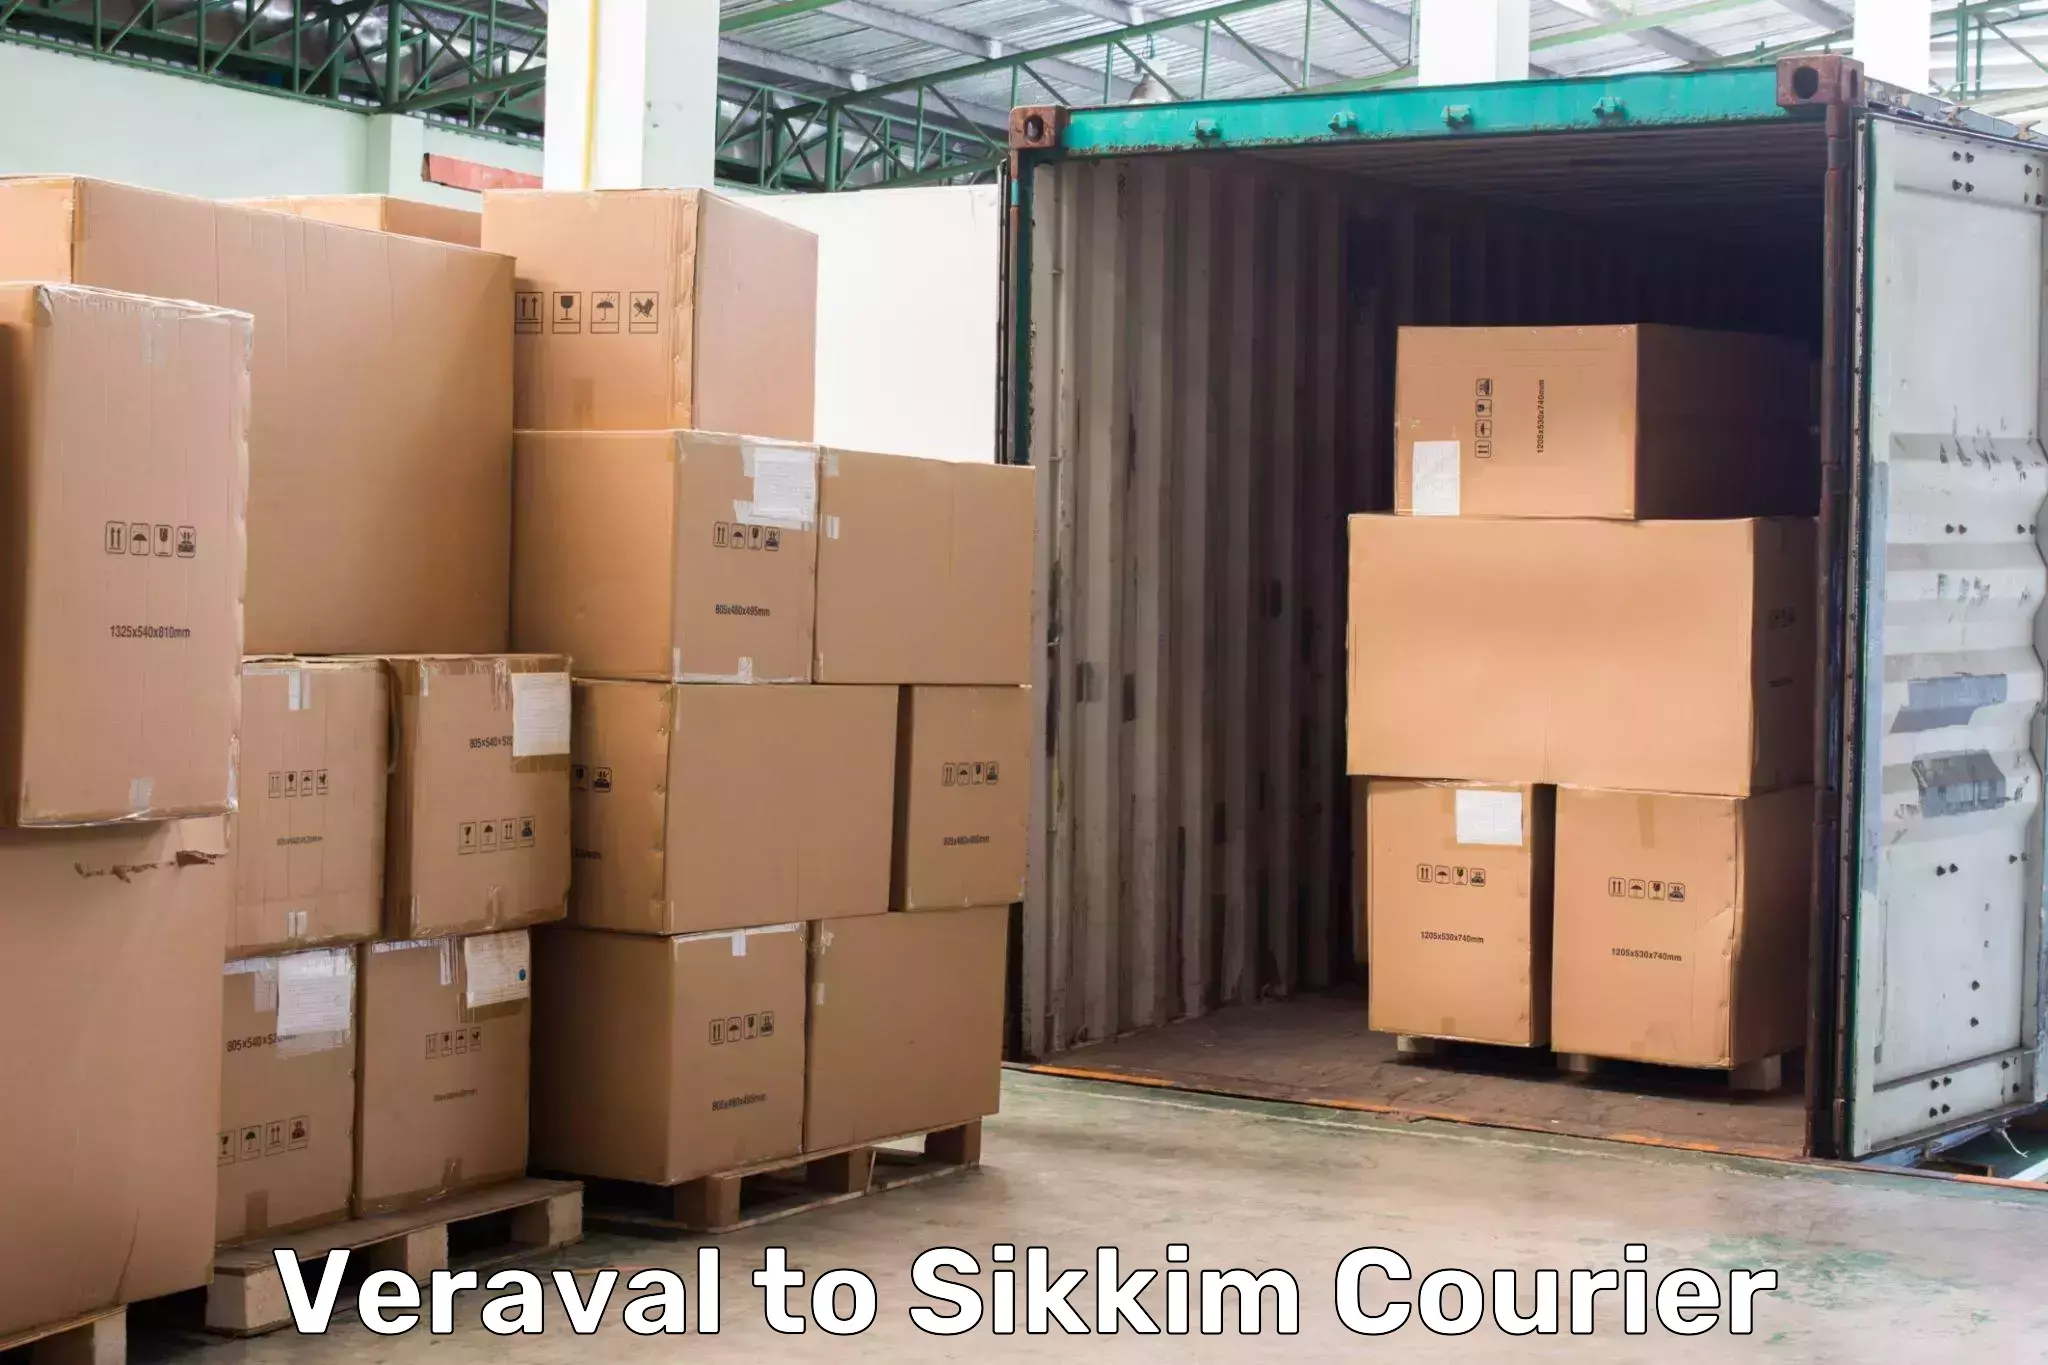 Enhanced tracking features in Veraval to South Sikkim